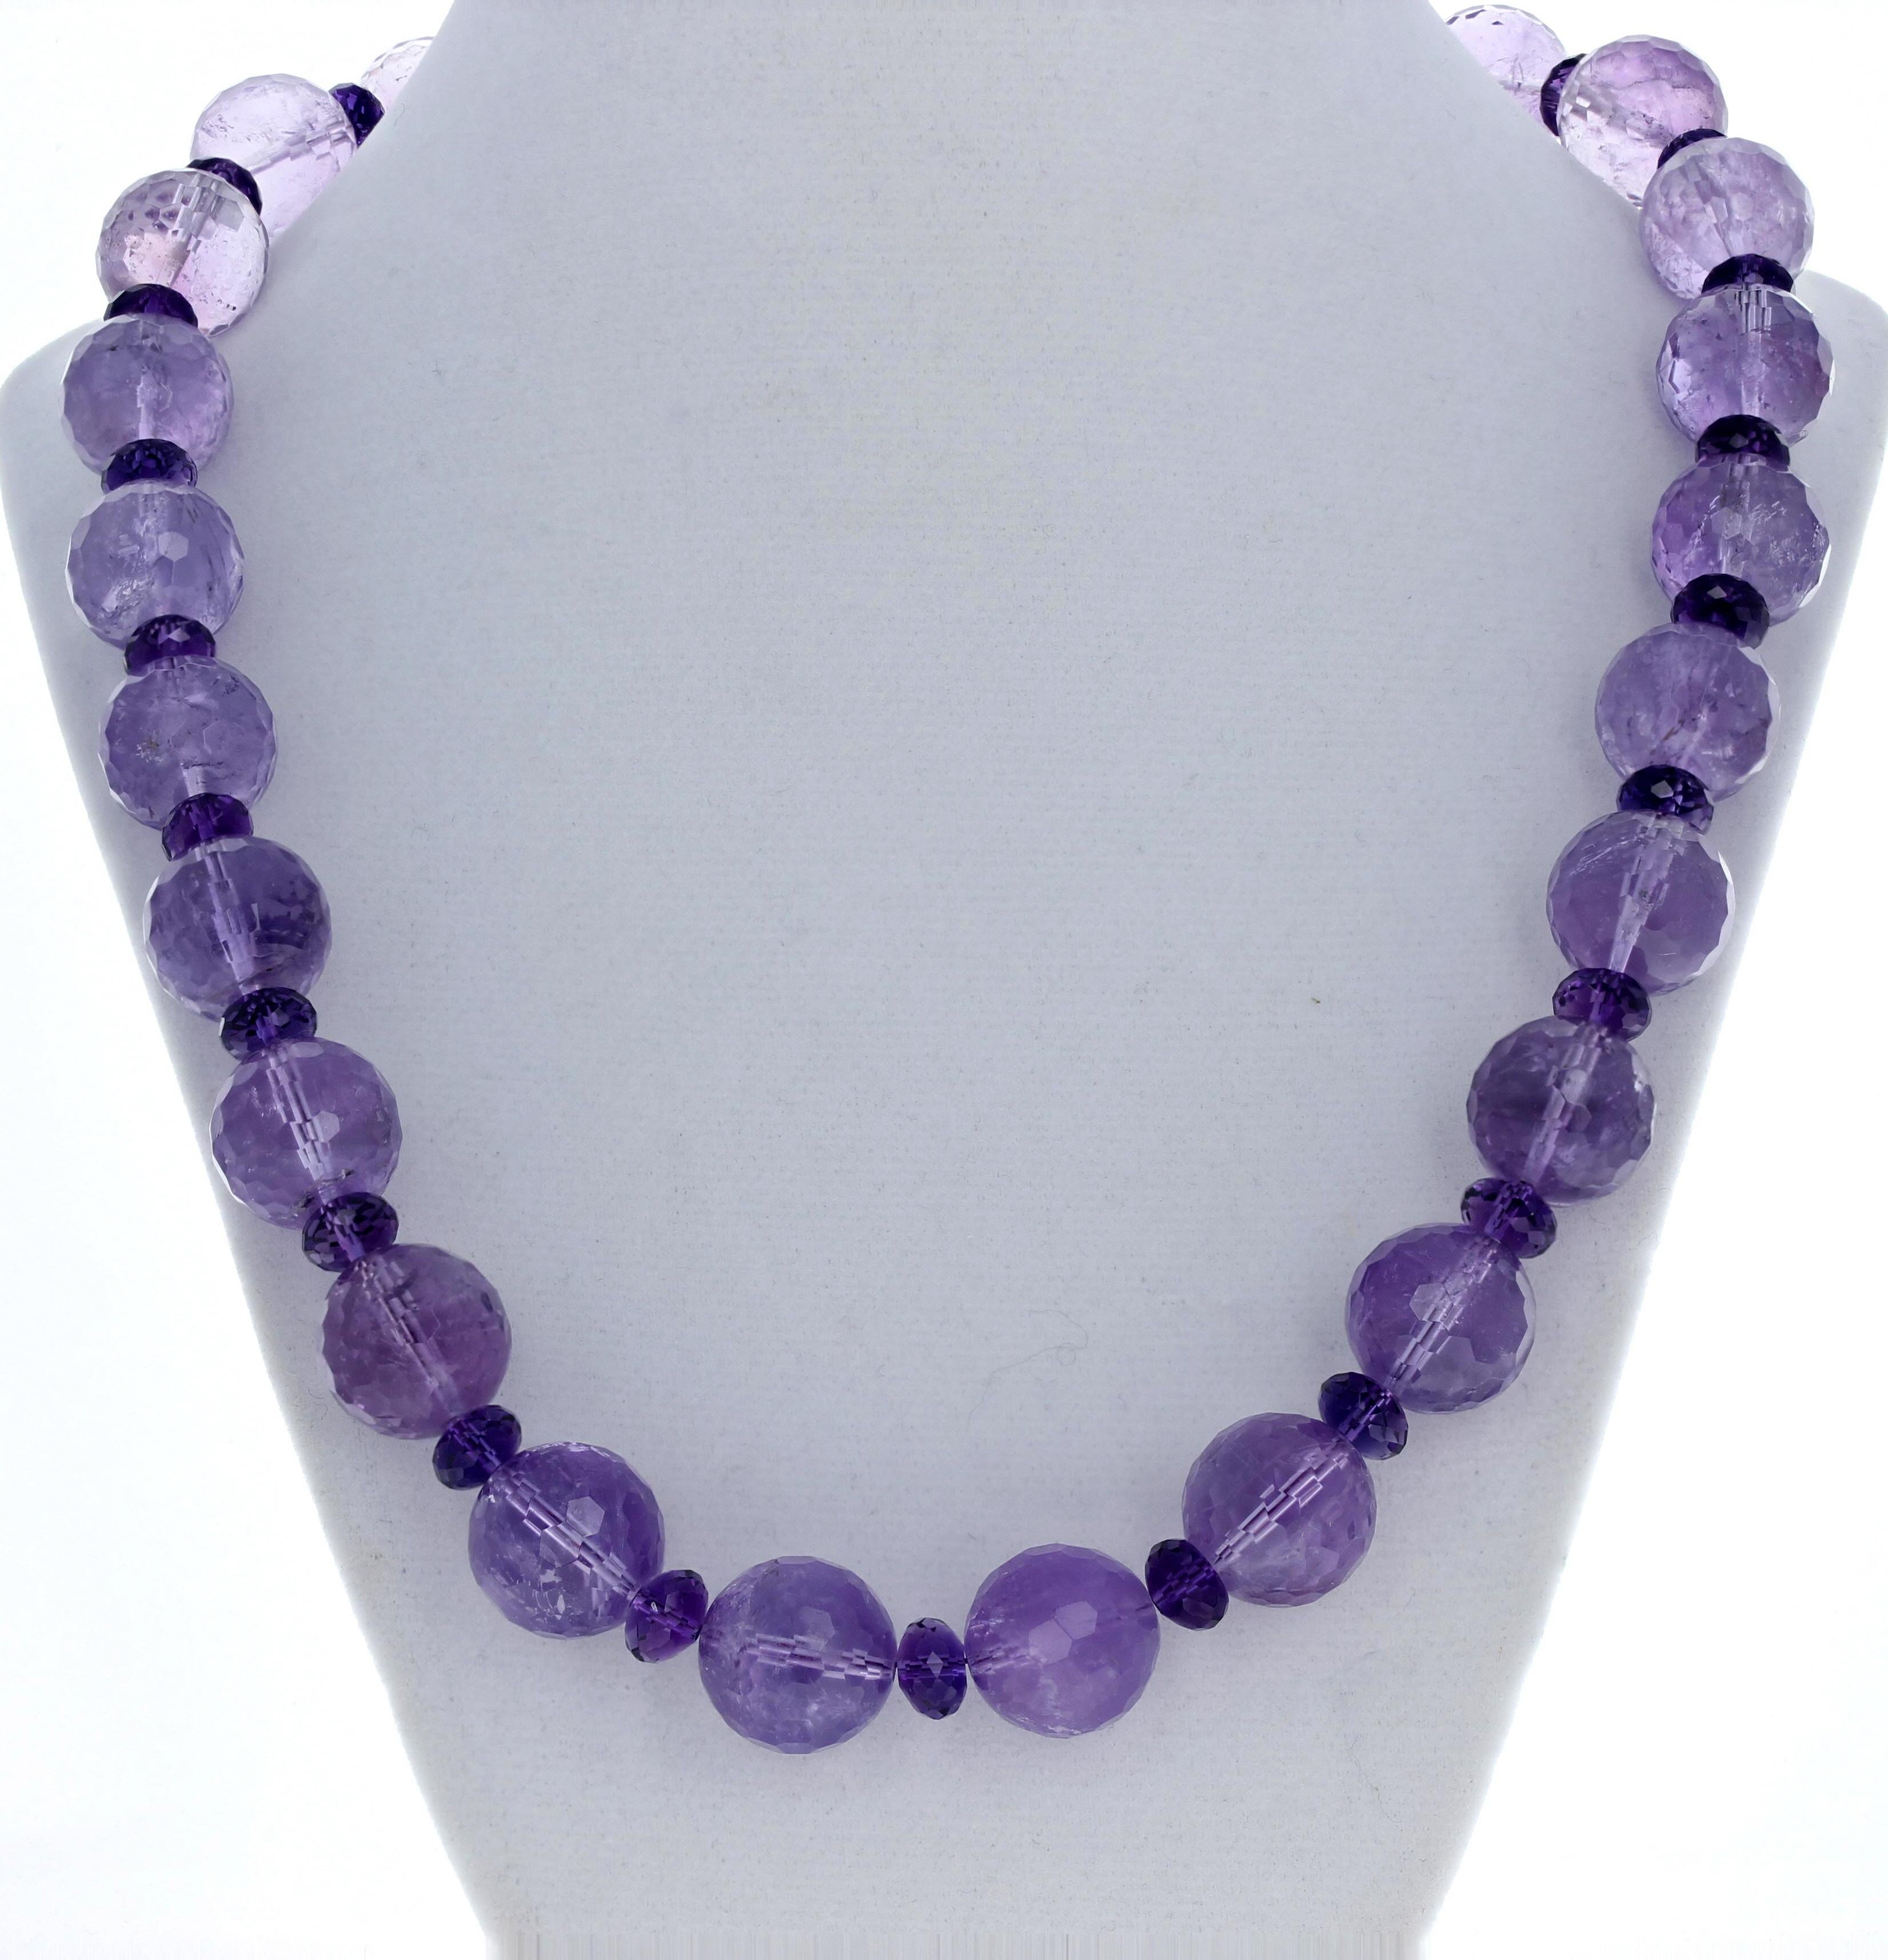 These highly polished sparkling natural real Amethyst gems are enhanced with intensely colored Amethyst gems as spacers.  The large gemstones are approximately 16 mm and the beautiful spacer Amethysts are approximately 8 1/2mm.  The spacer gemstones